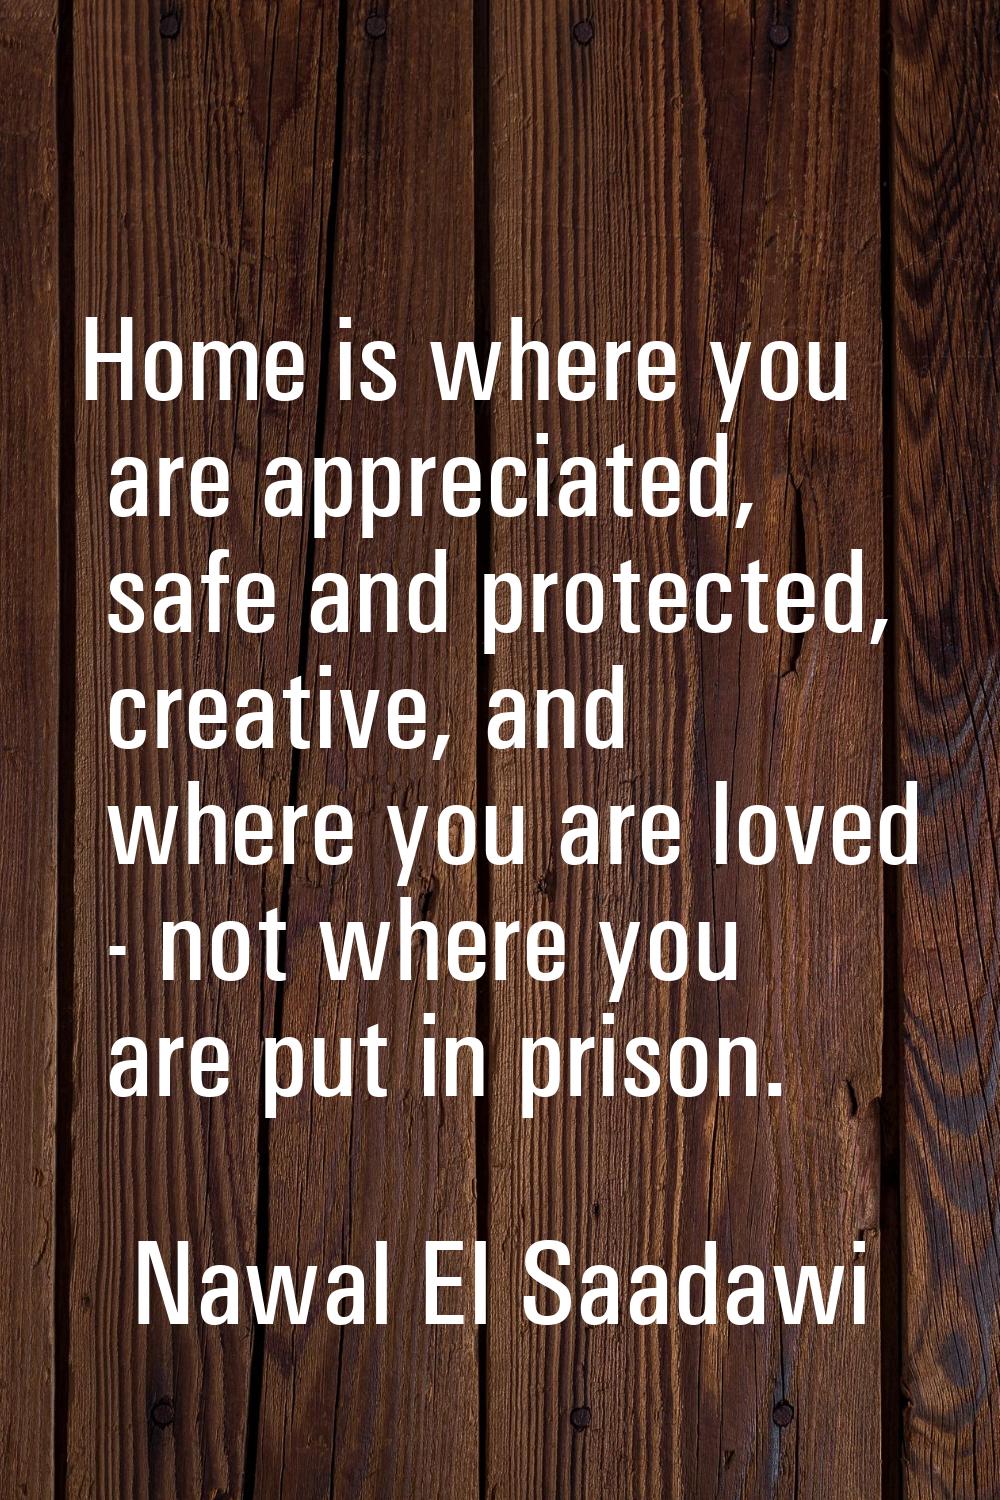 Home is where you are appreciated, safe and protected, creative, and where you are loved - not wher